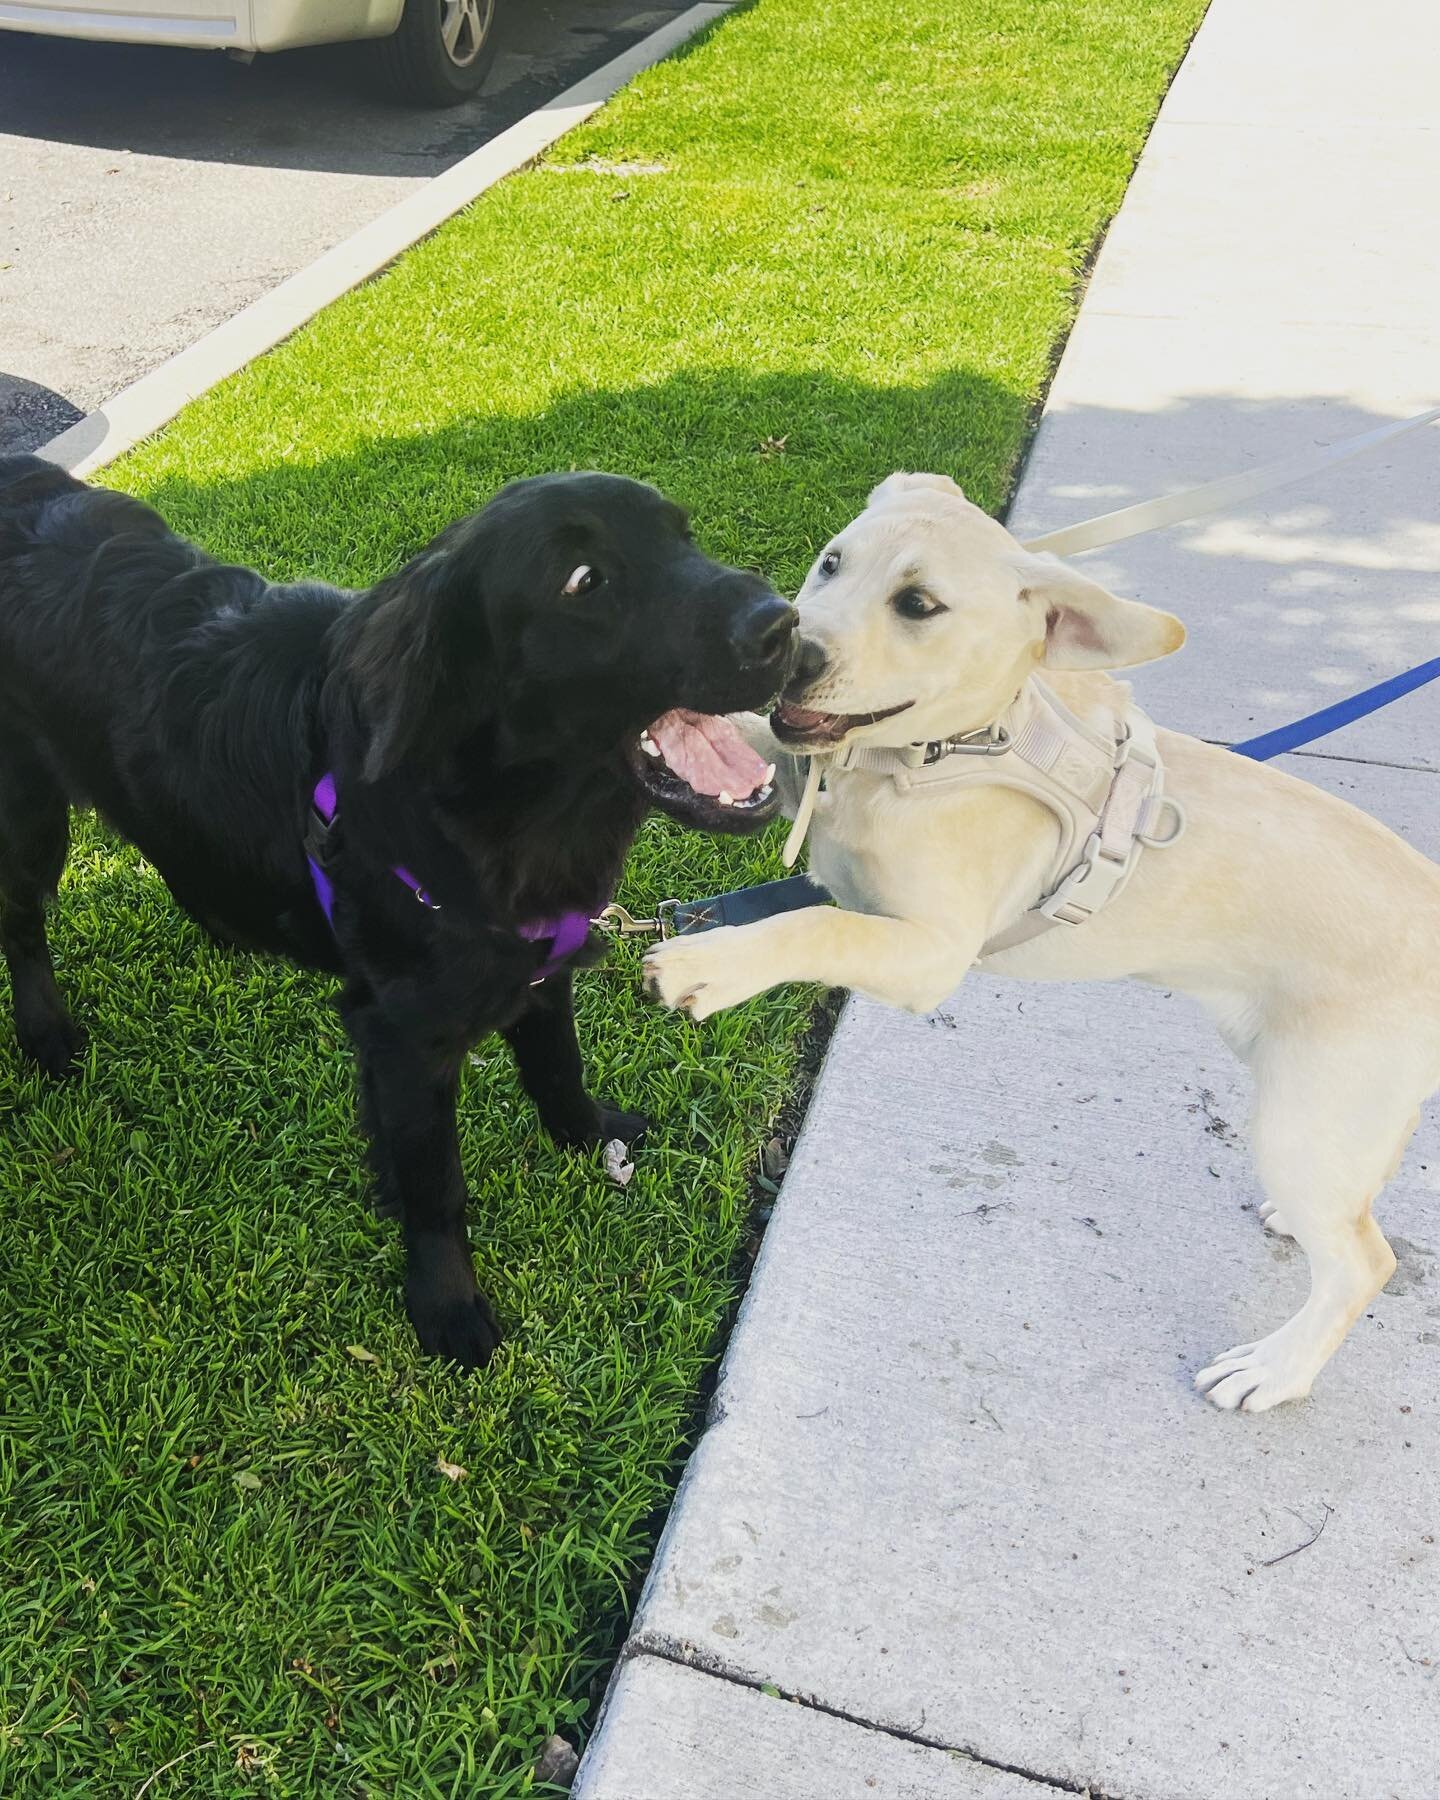 It&rsquo;s puppy season here at Barks &amp; Rec!!! Teddy (black) and Riley (white) have been inseparable ever since they met each other a few weeks ago. Riley was a little nervous on her first pack walk, but as soon as Teddy arrived, she instantly ra